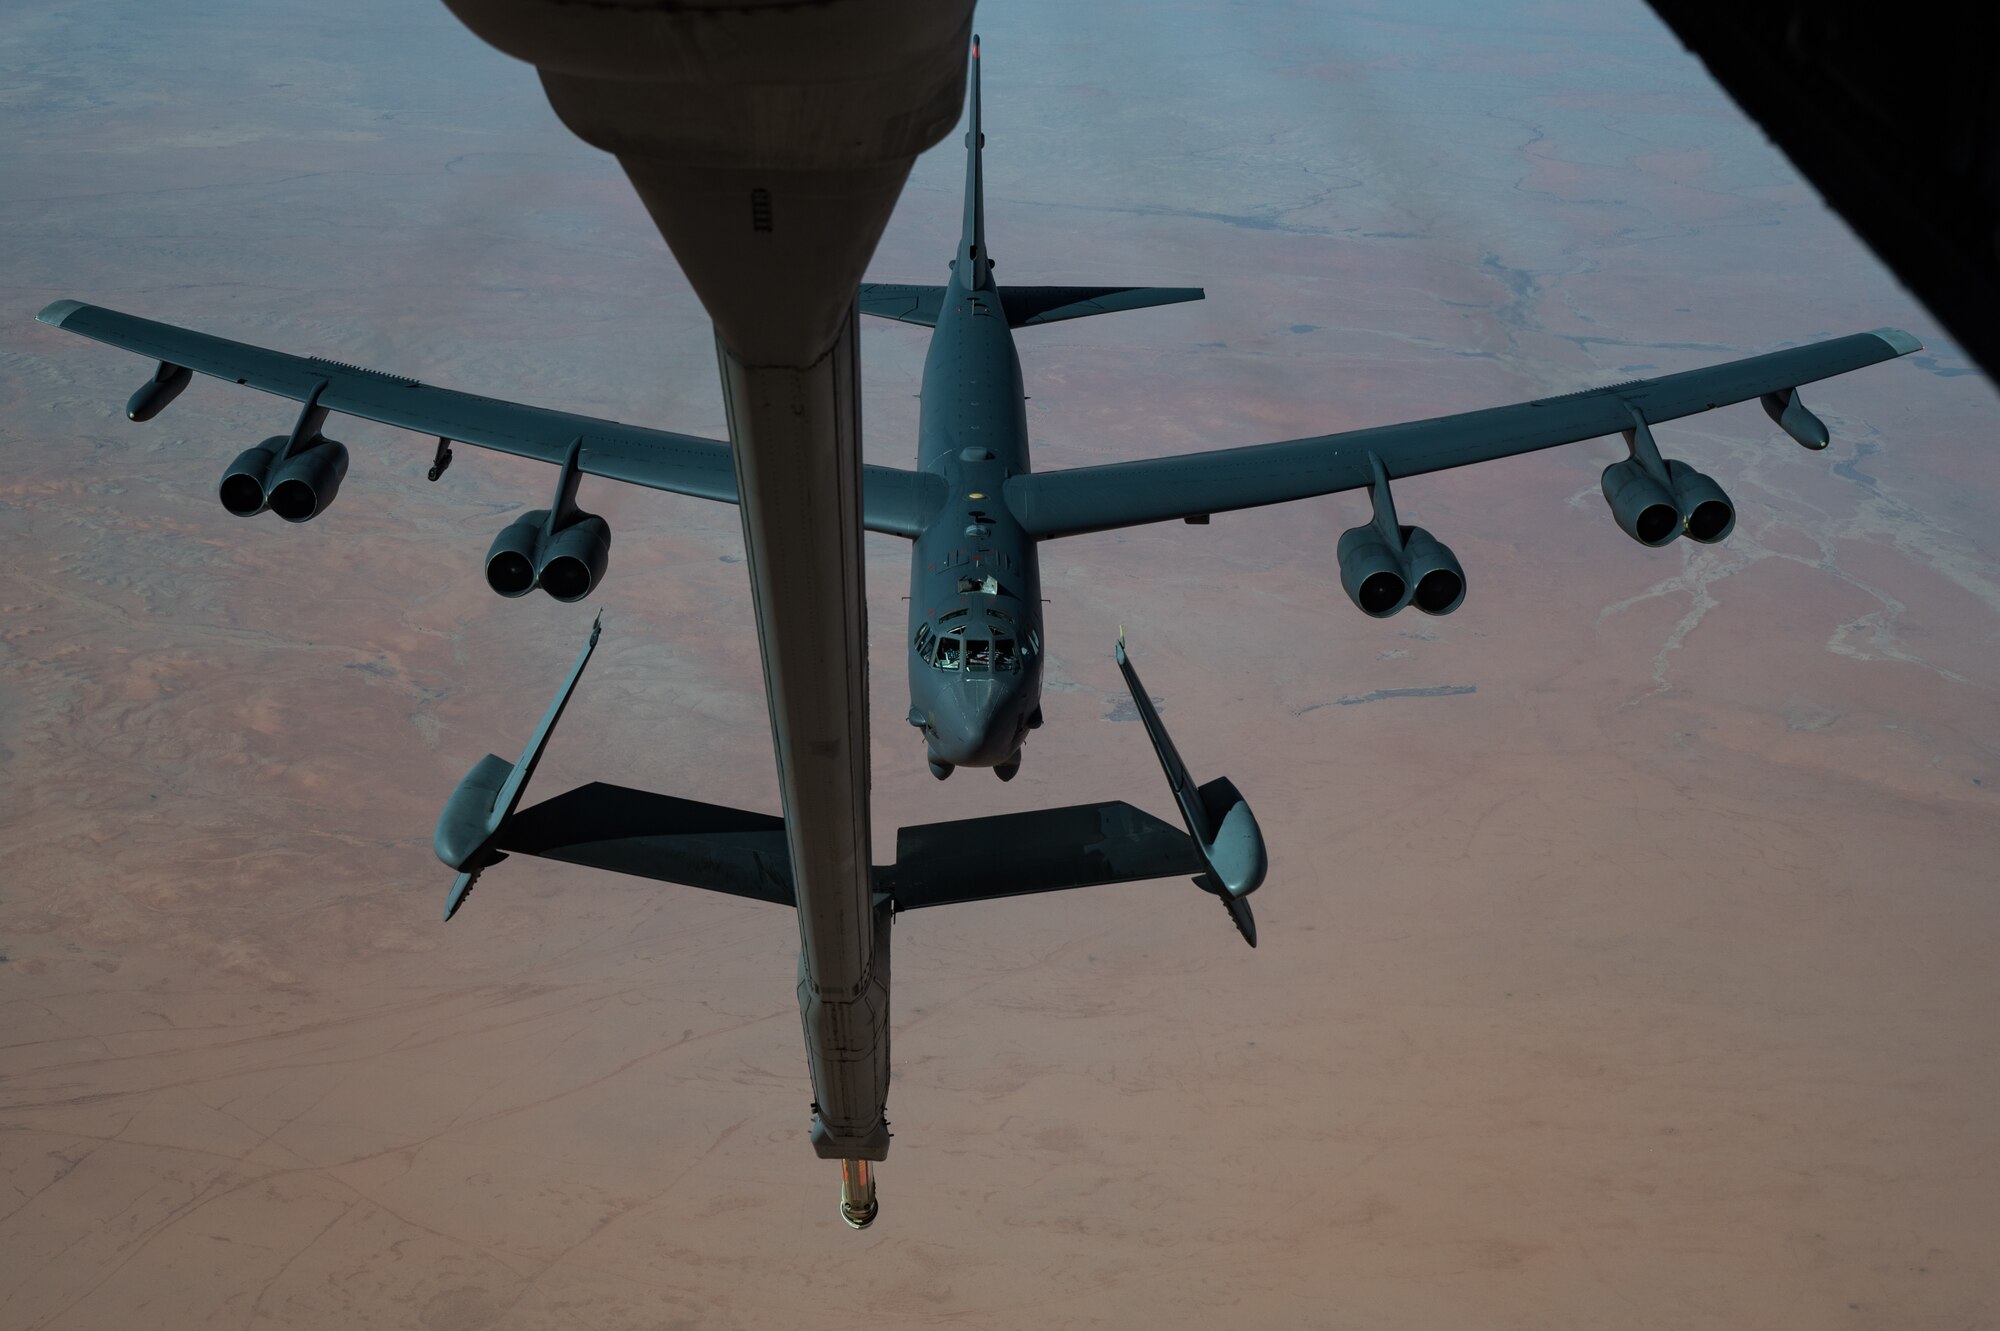 A U.S. Air Force B-52 Stratofortress pulls up behind a KC-10 Extender assigned to the 908th Expeditionary Air Refueling Squadron during an aerial refueling in the U.S. Central Command area of responsibility Dec. 10, 2020.  A pair of B-52s assigned to the Barksdale Air Force Base-headquartered 2nd Bomb Wing operated in the USCENTCOM area of responsibility with other U.S. Air Force and regional partner aircraft in the second mission in as many months. (U.S. Air Force photo by Staff Sgt. Sean Carnes)